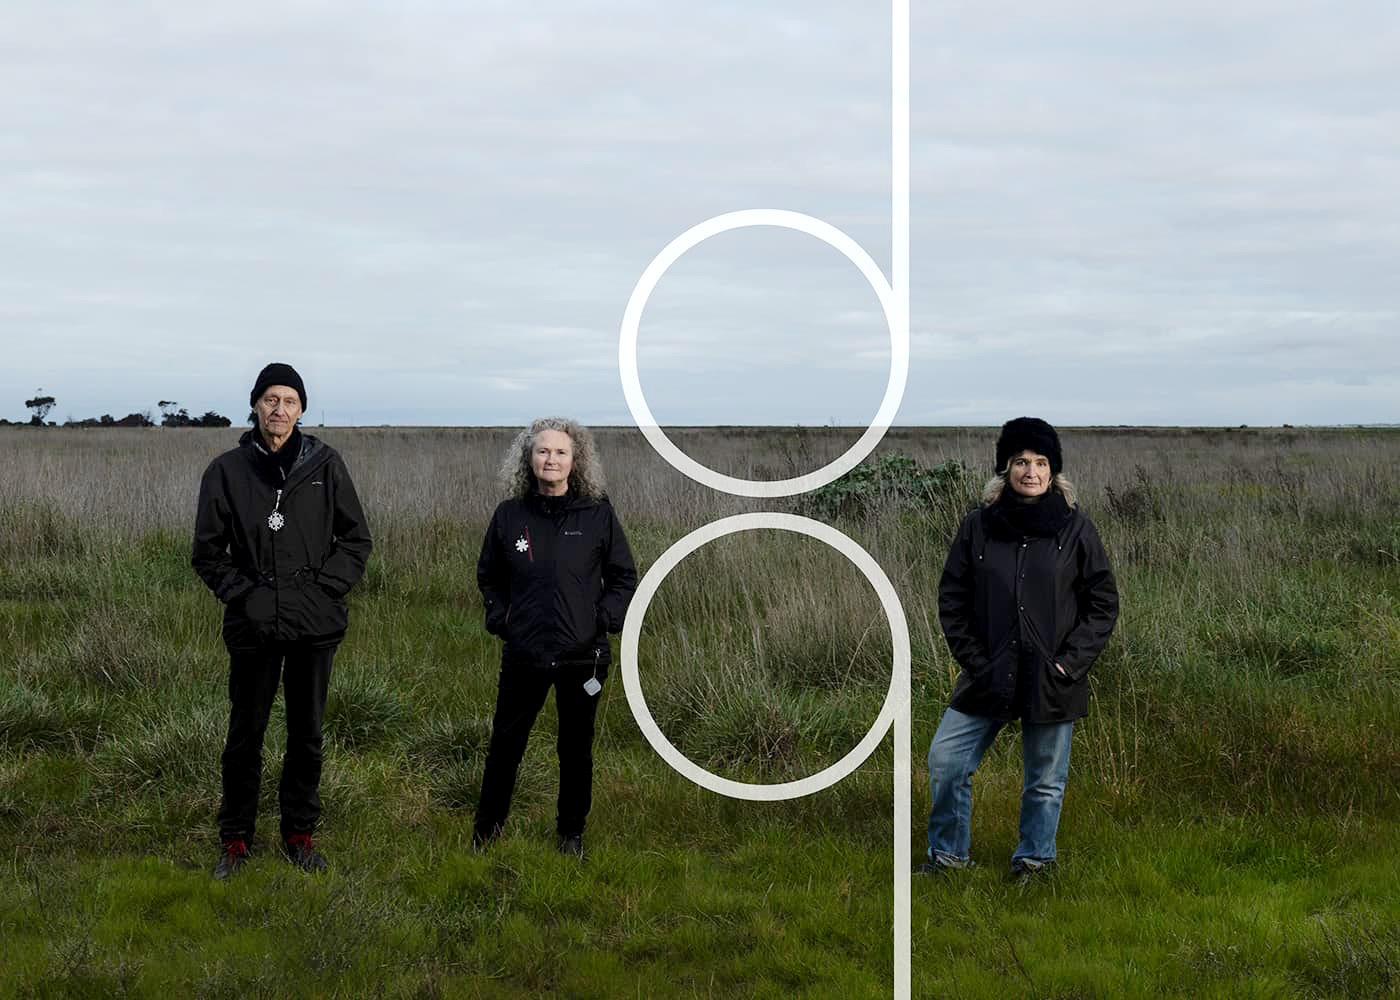 Madeleine Flynn, Tim Humphrey & Jenny Hector standing in a grassy field on a cloudy day looking at the camera